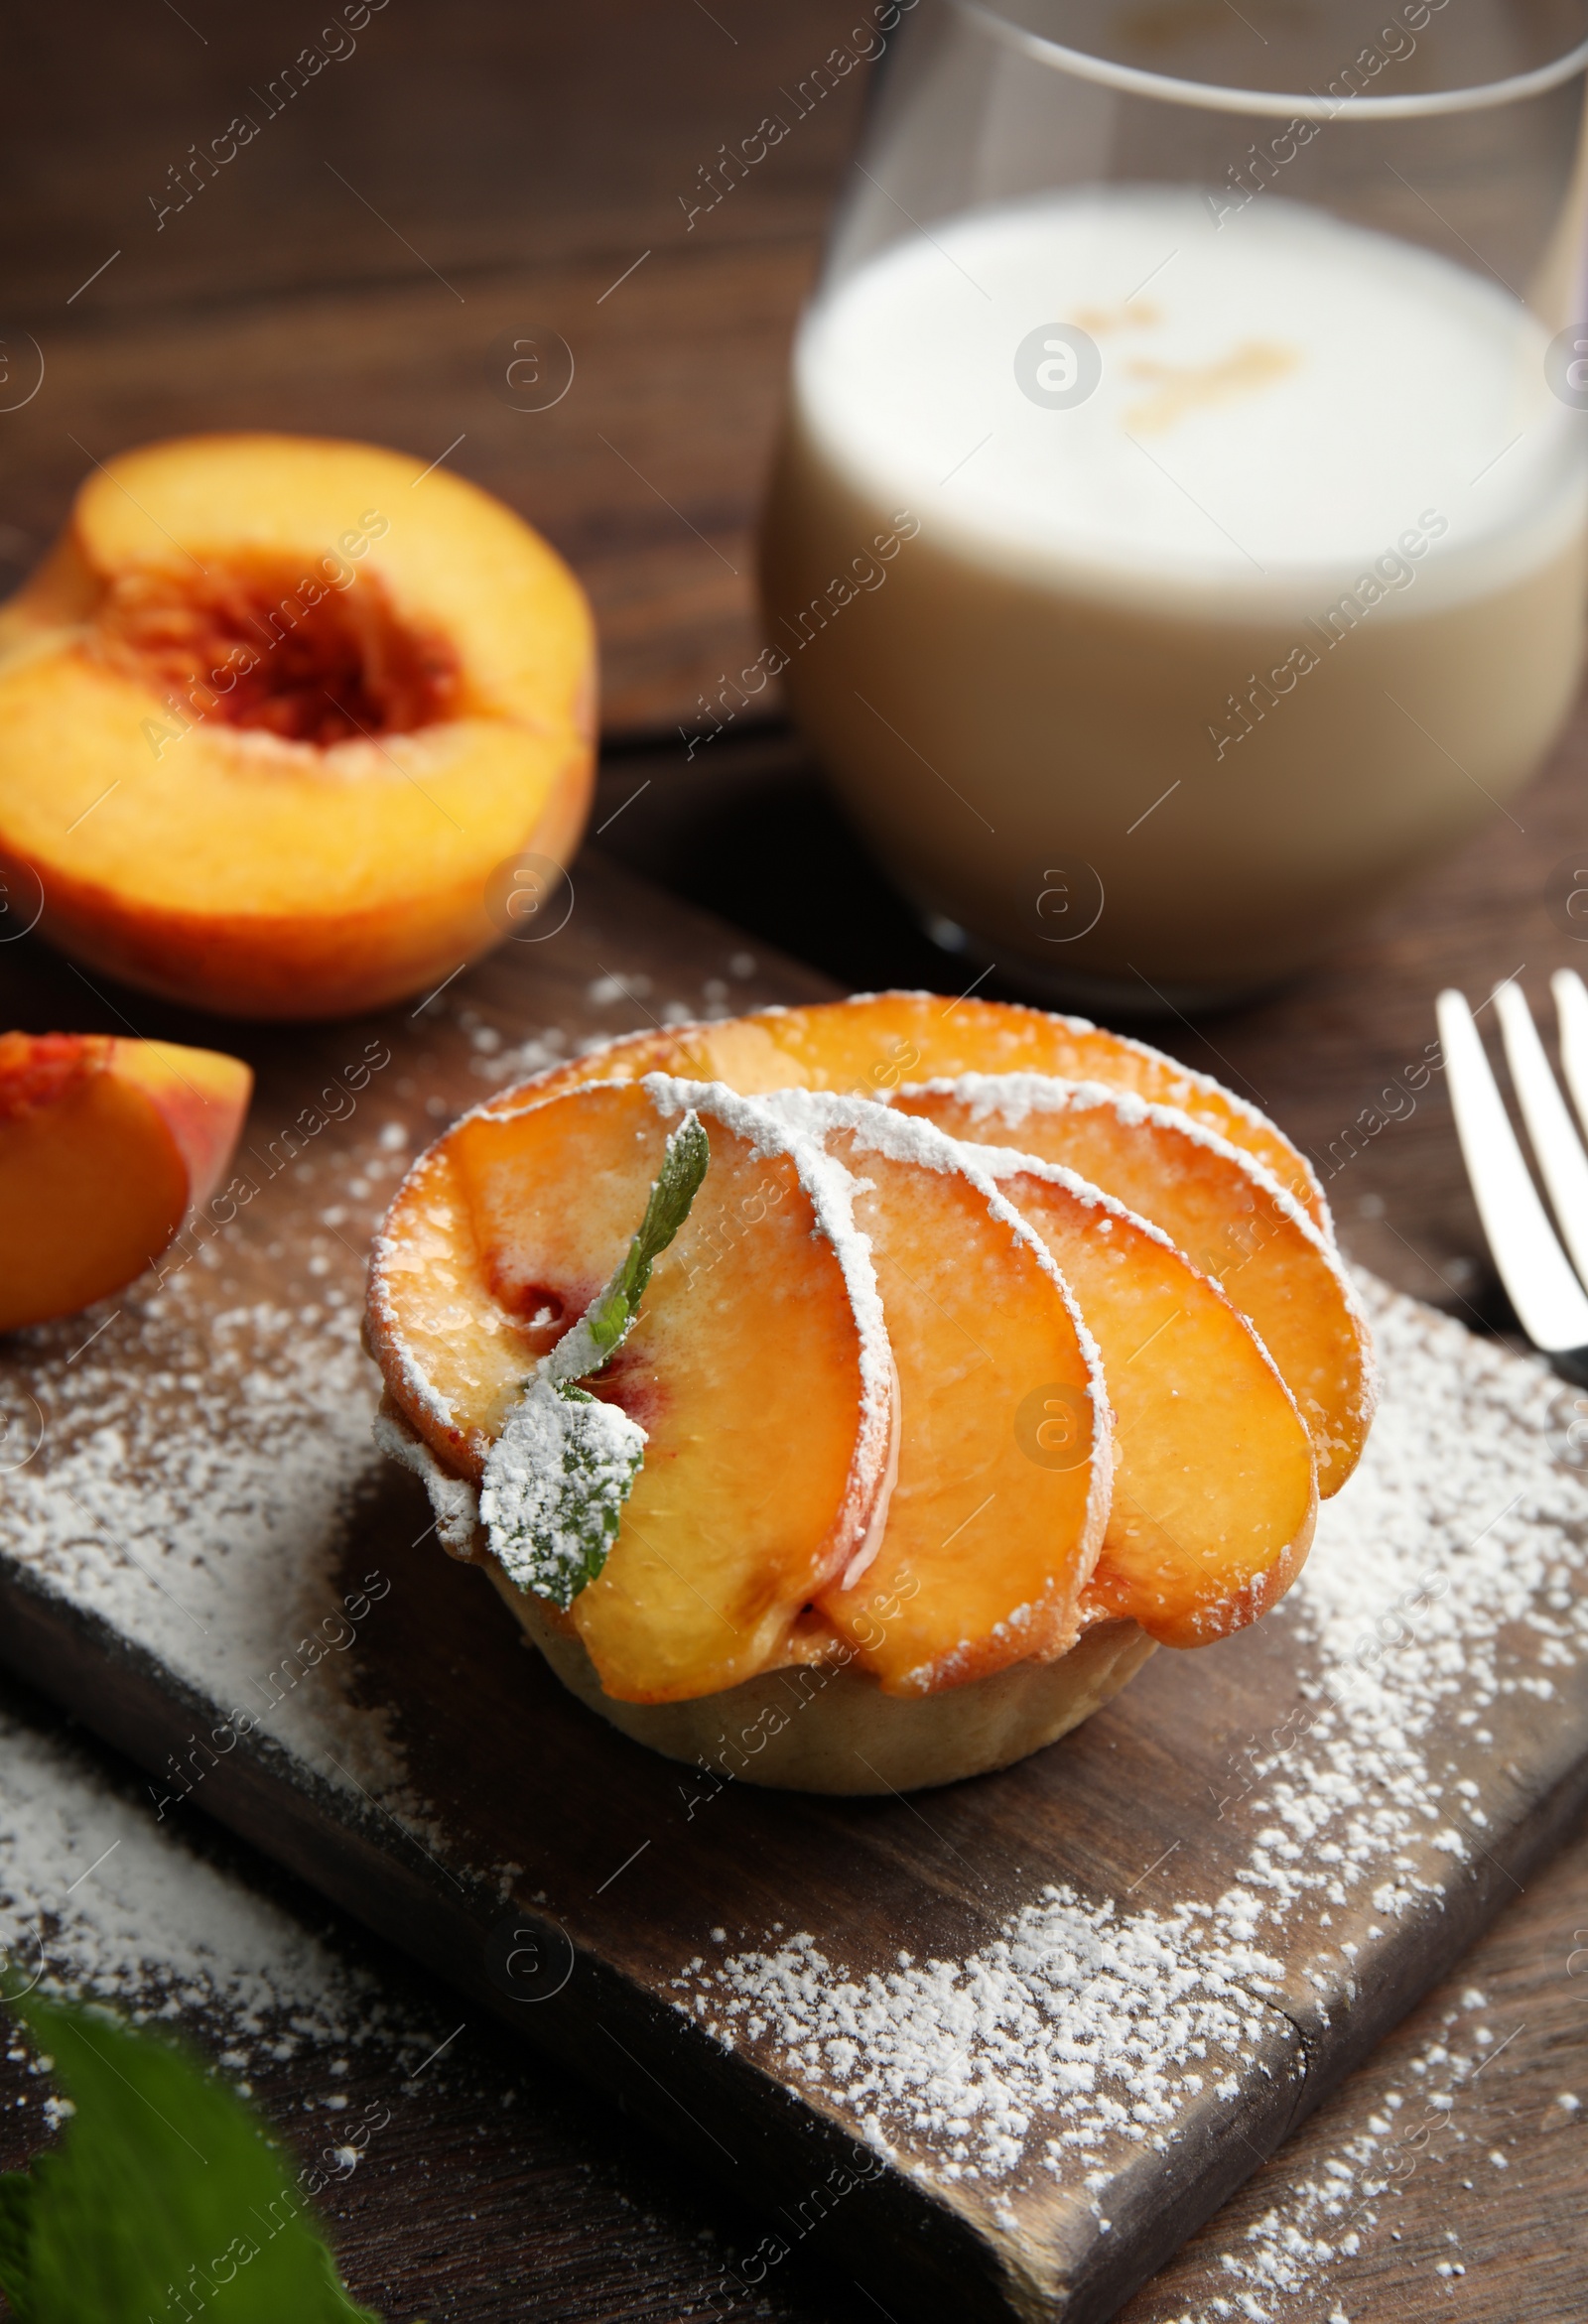 Photo of Delicious peach dessert served on wooden table